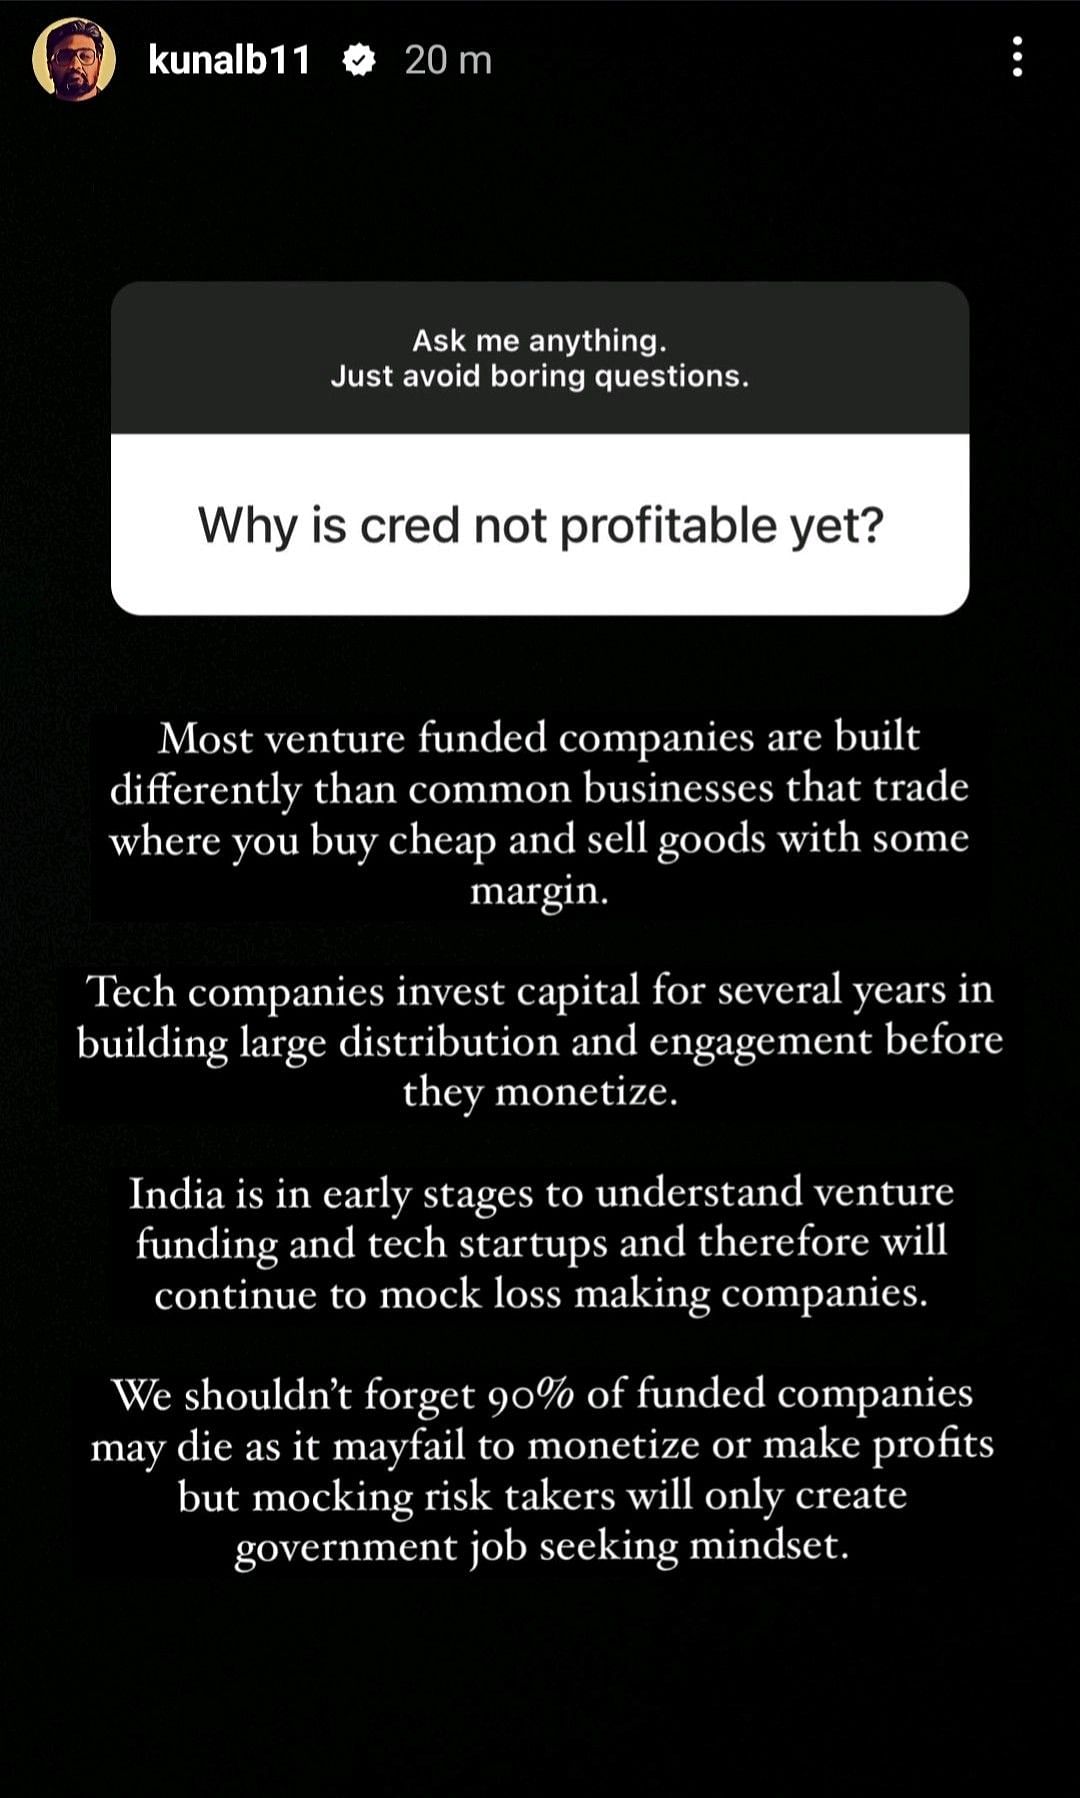 Why is CRED not profitable yet?